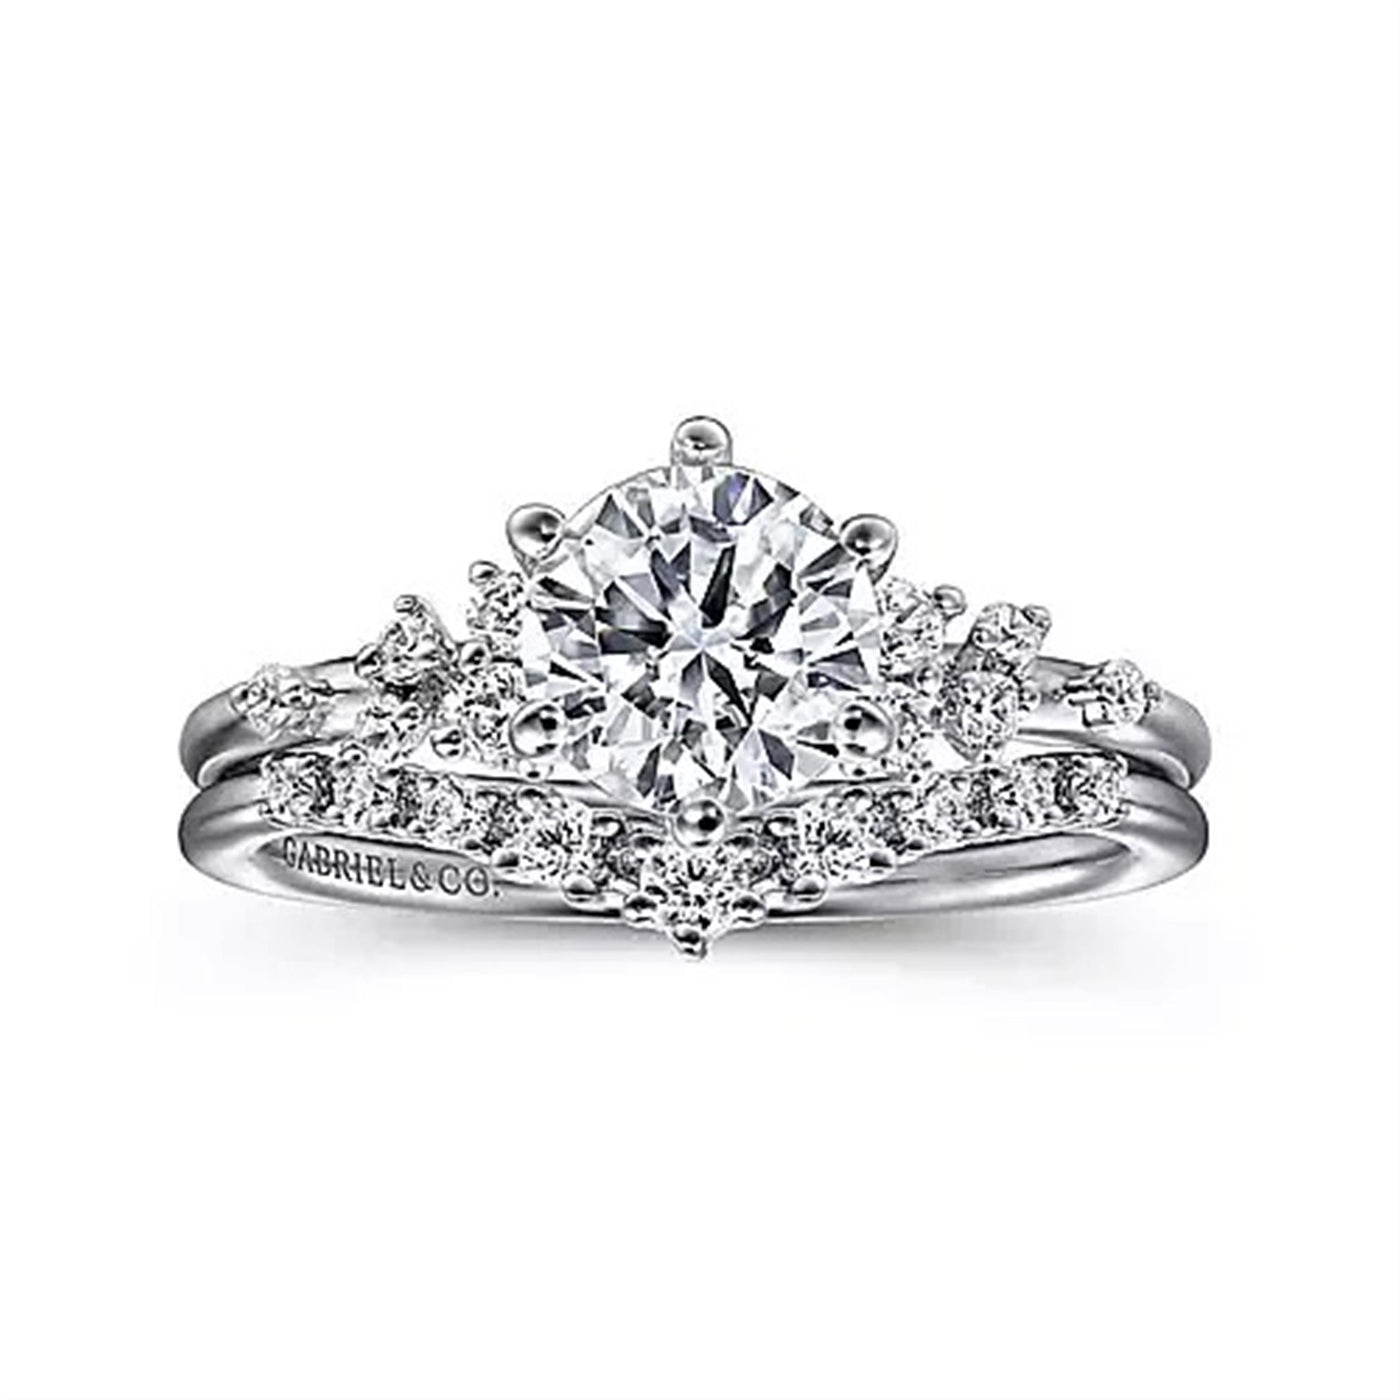 Gabriel - Floral Collection 14K White Gold .17ctw 6 Prong Style Diamond Semi-Mount Engagement Ring